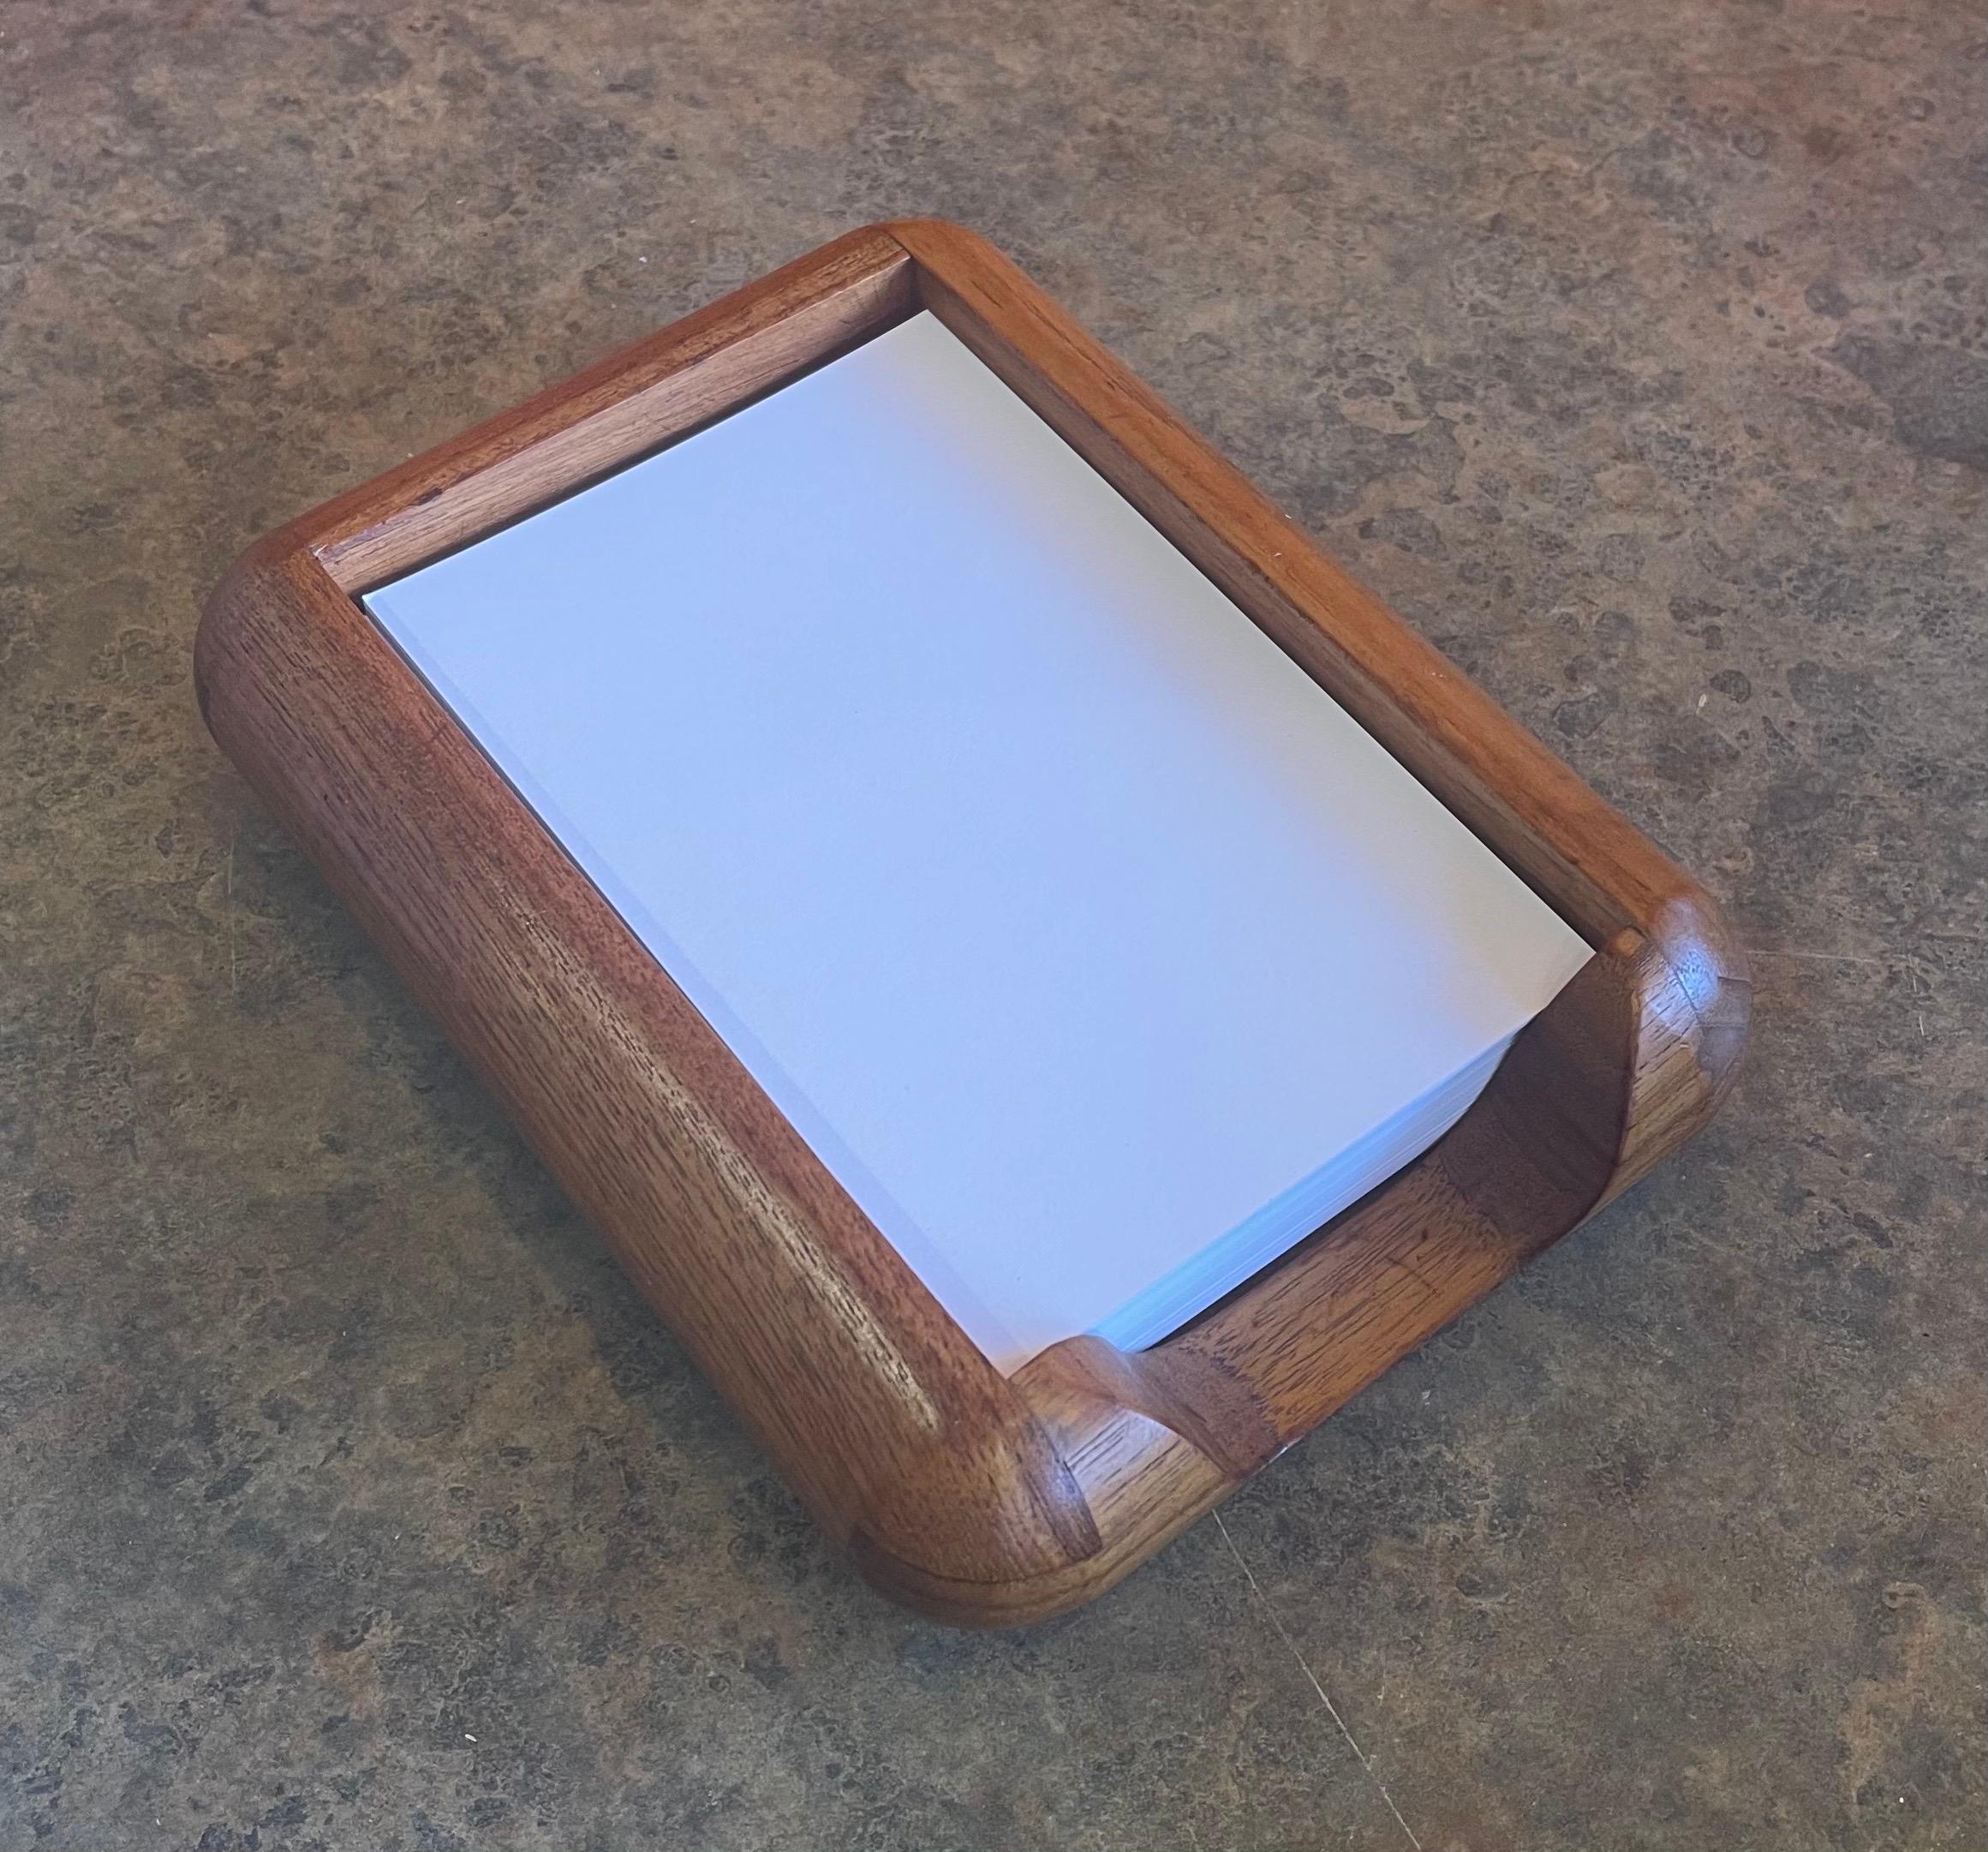 Danish Modern Desk Paper Tray in Teak In Good Condition For Sale In San Diego, CA